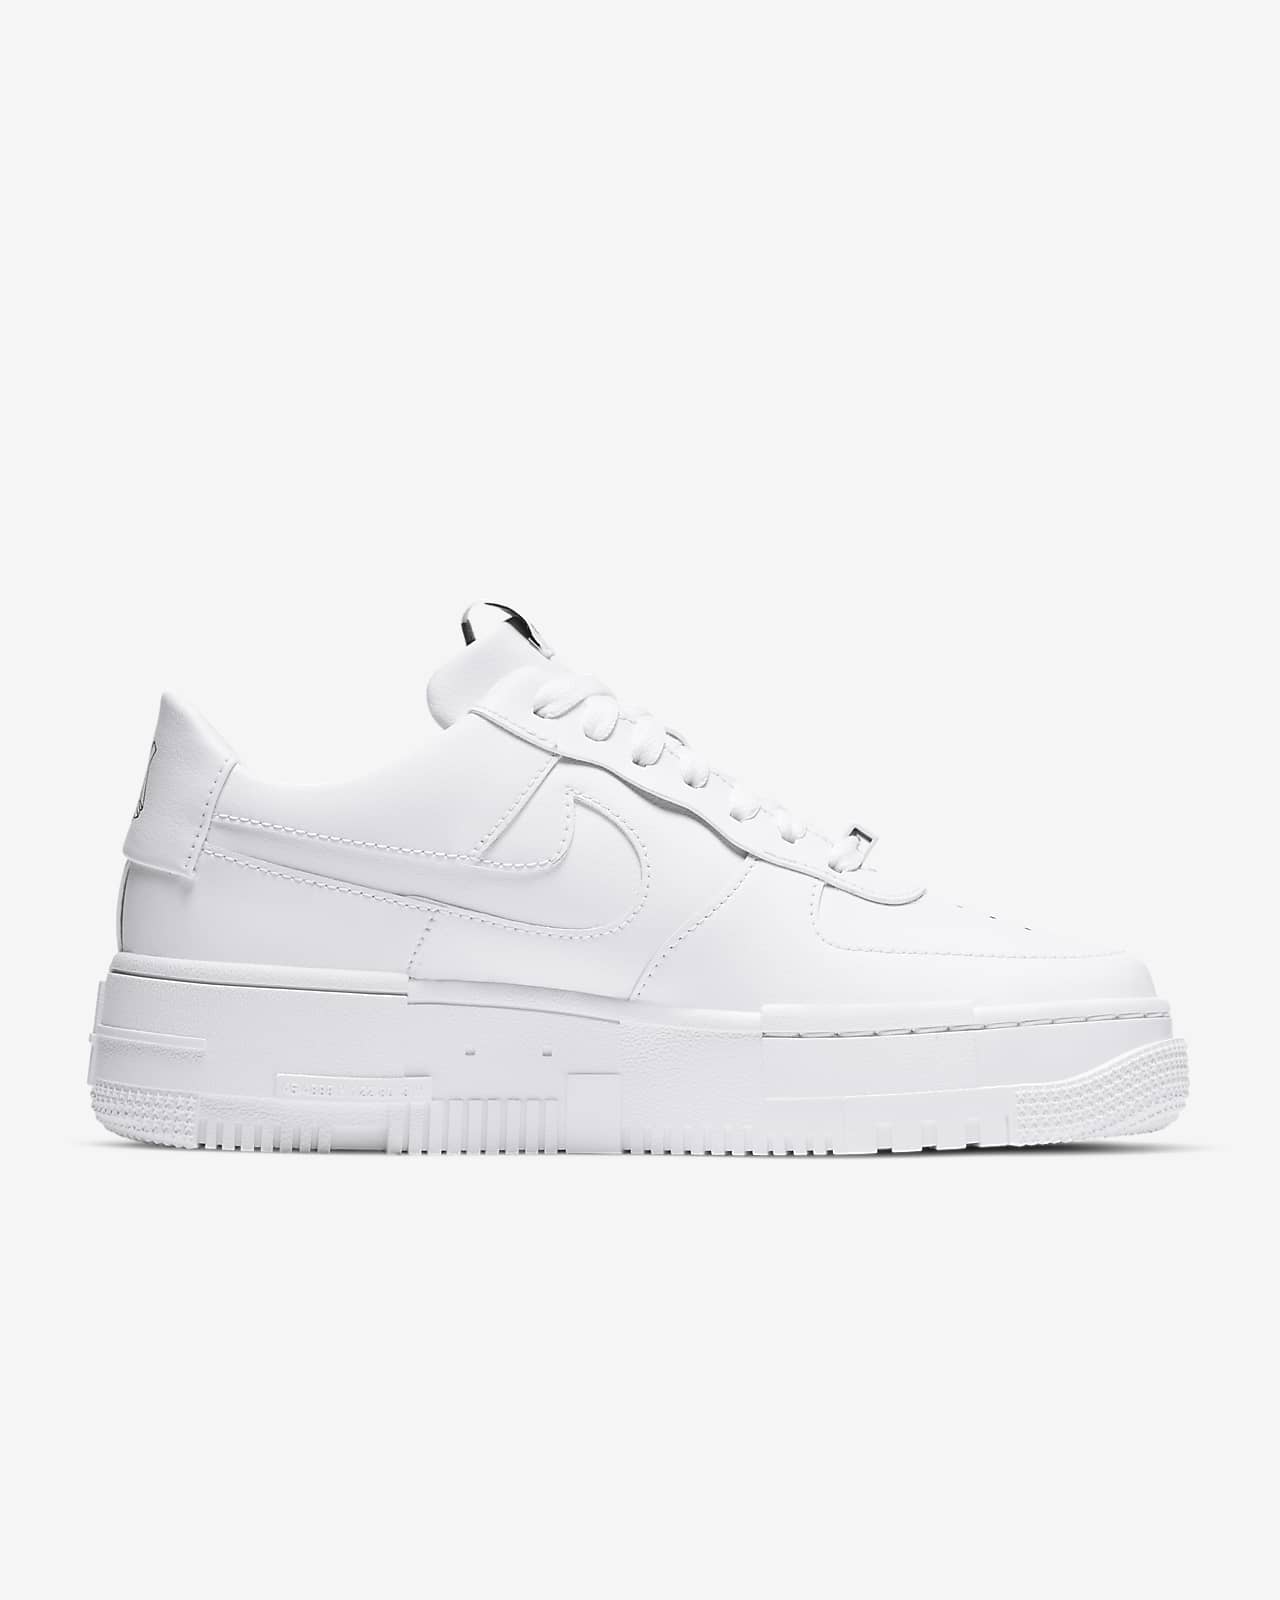 Chaussure Nike Air Force 1 Pixel pour Femme. Nike LU